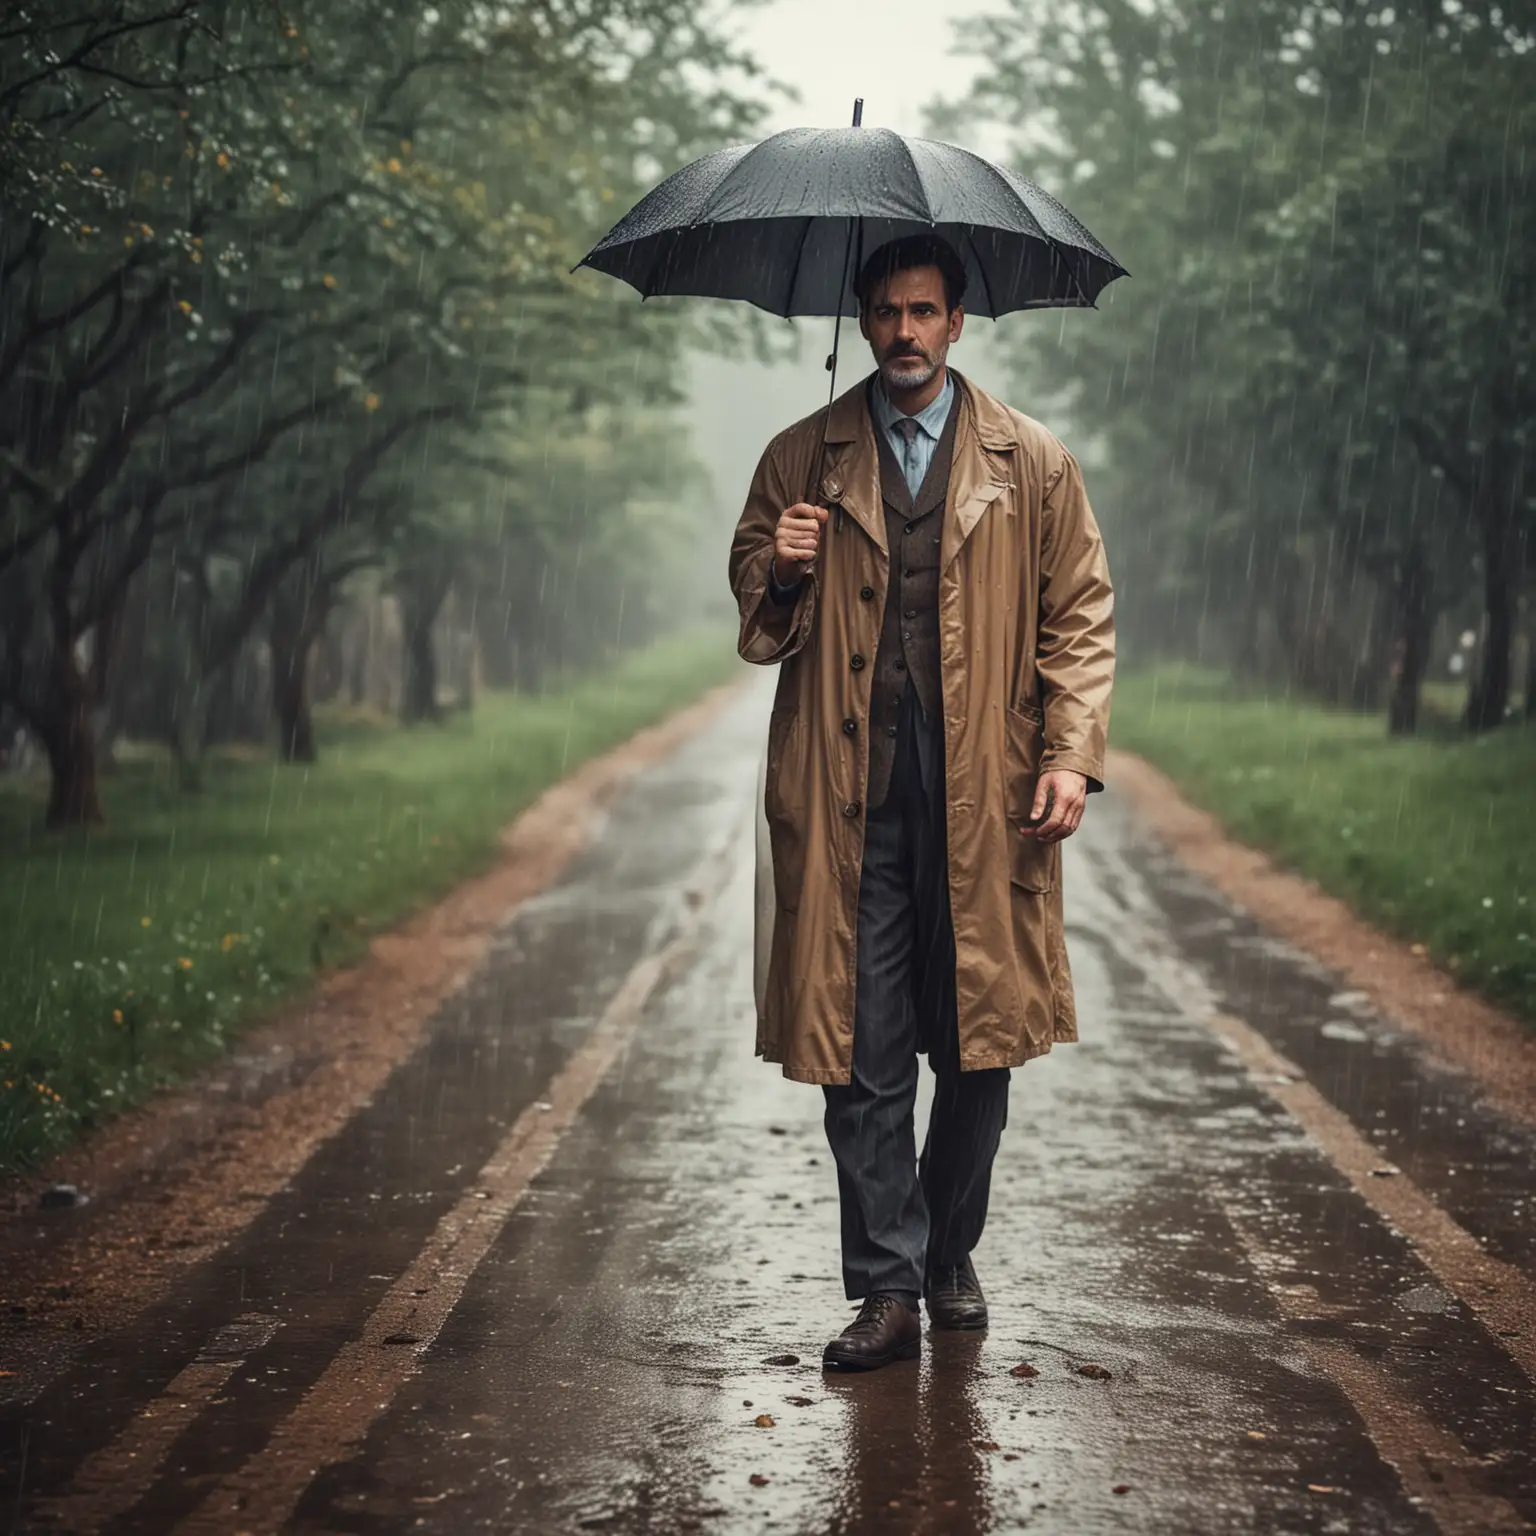 Vintage Doctor Walking in the Rain with an Umbrella